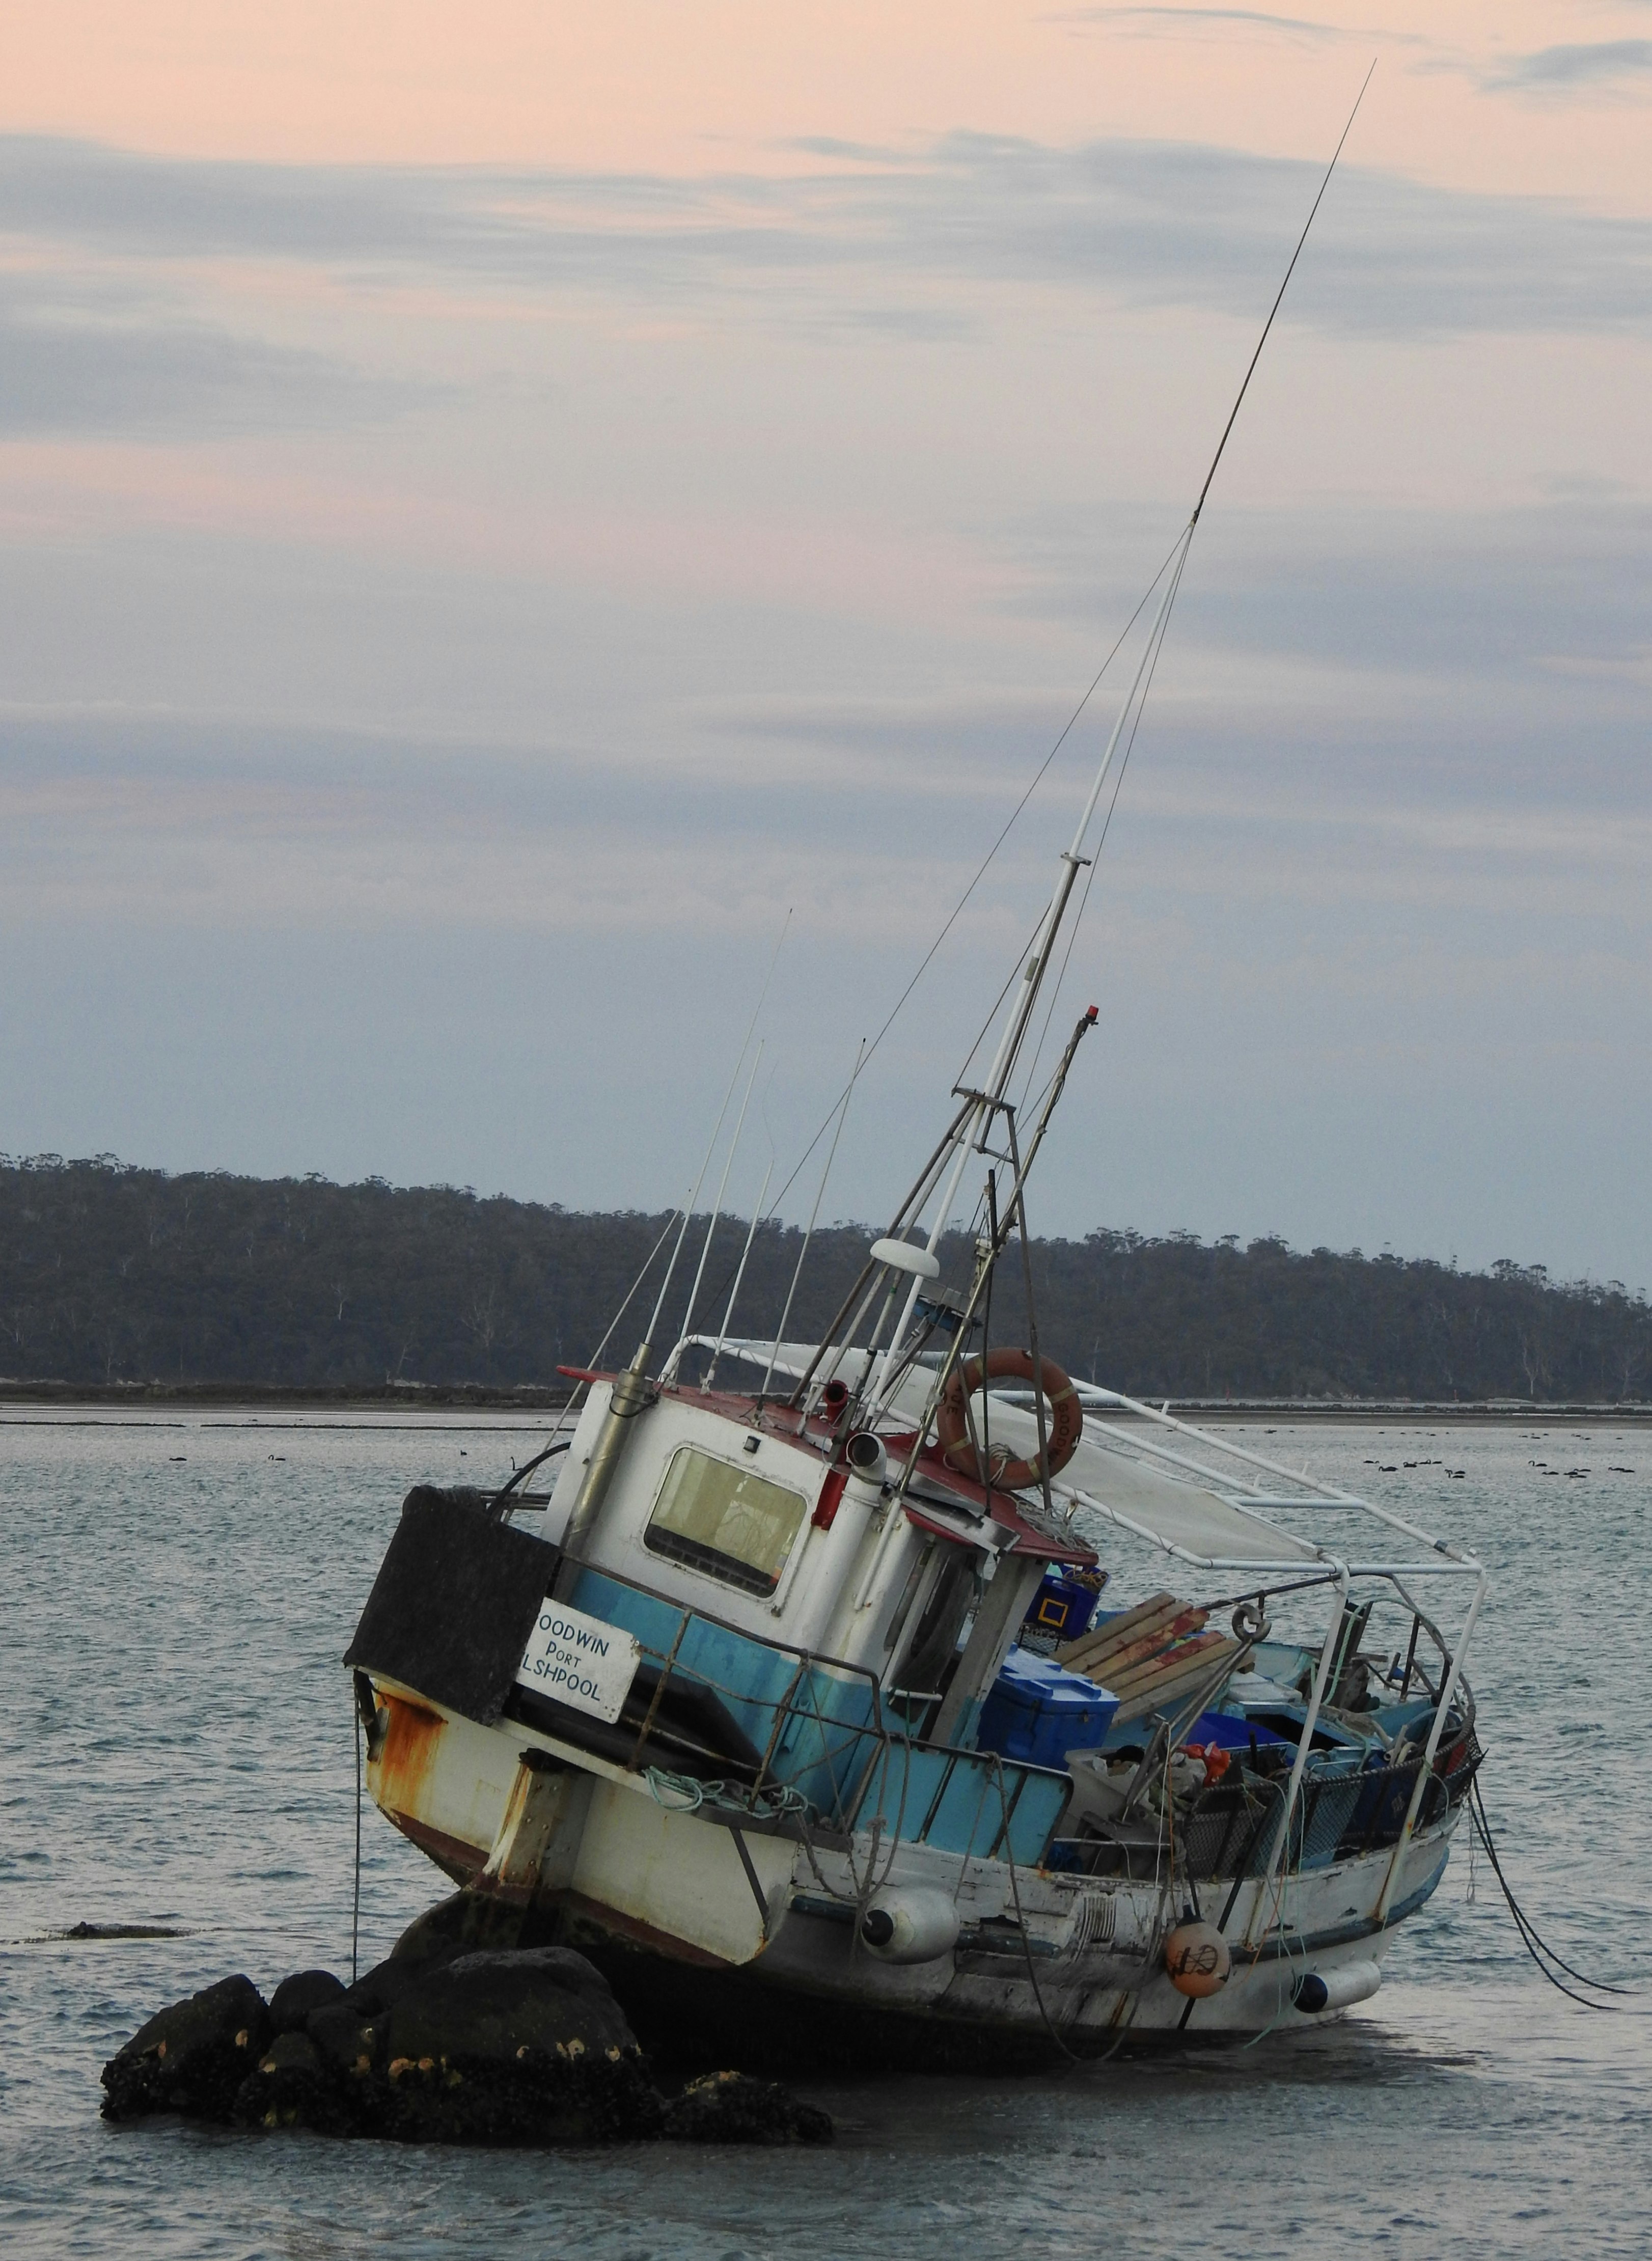 On the Rocks. The clay base of George's Bay couldn't hold the anchor of this fishing boat during a wild storm.